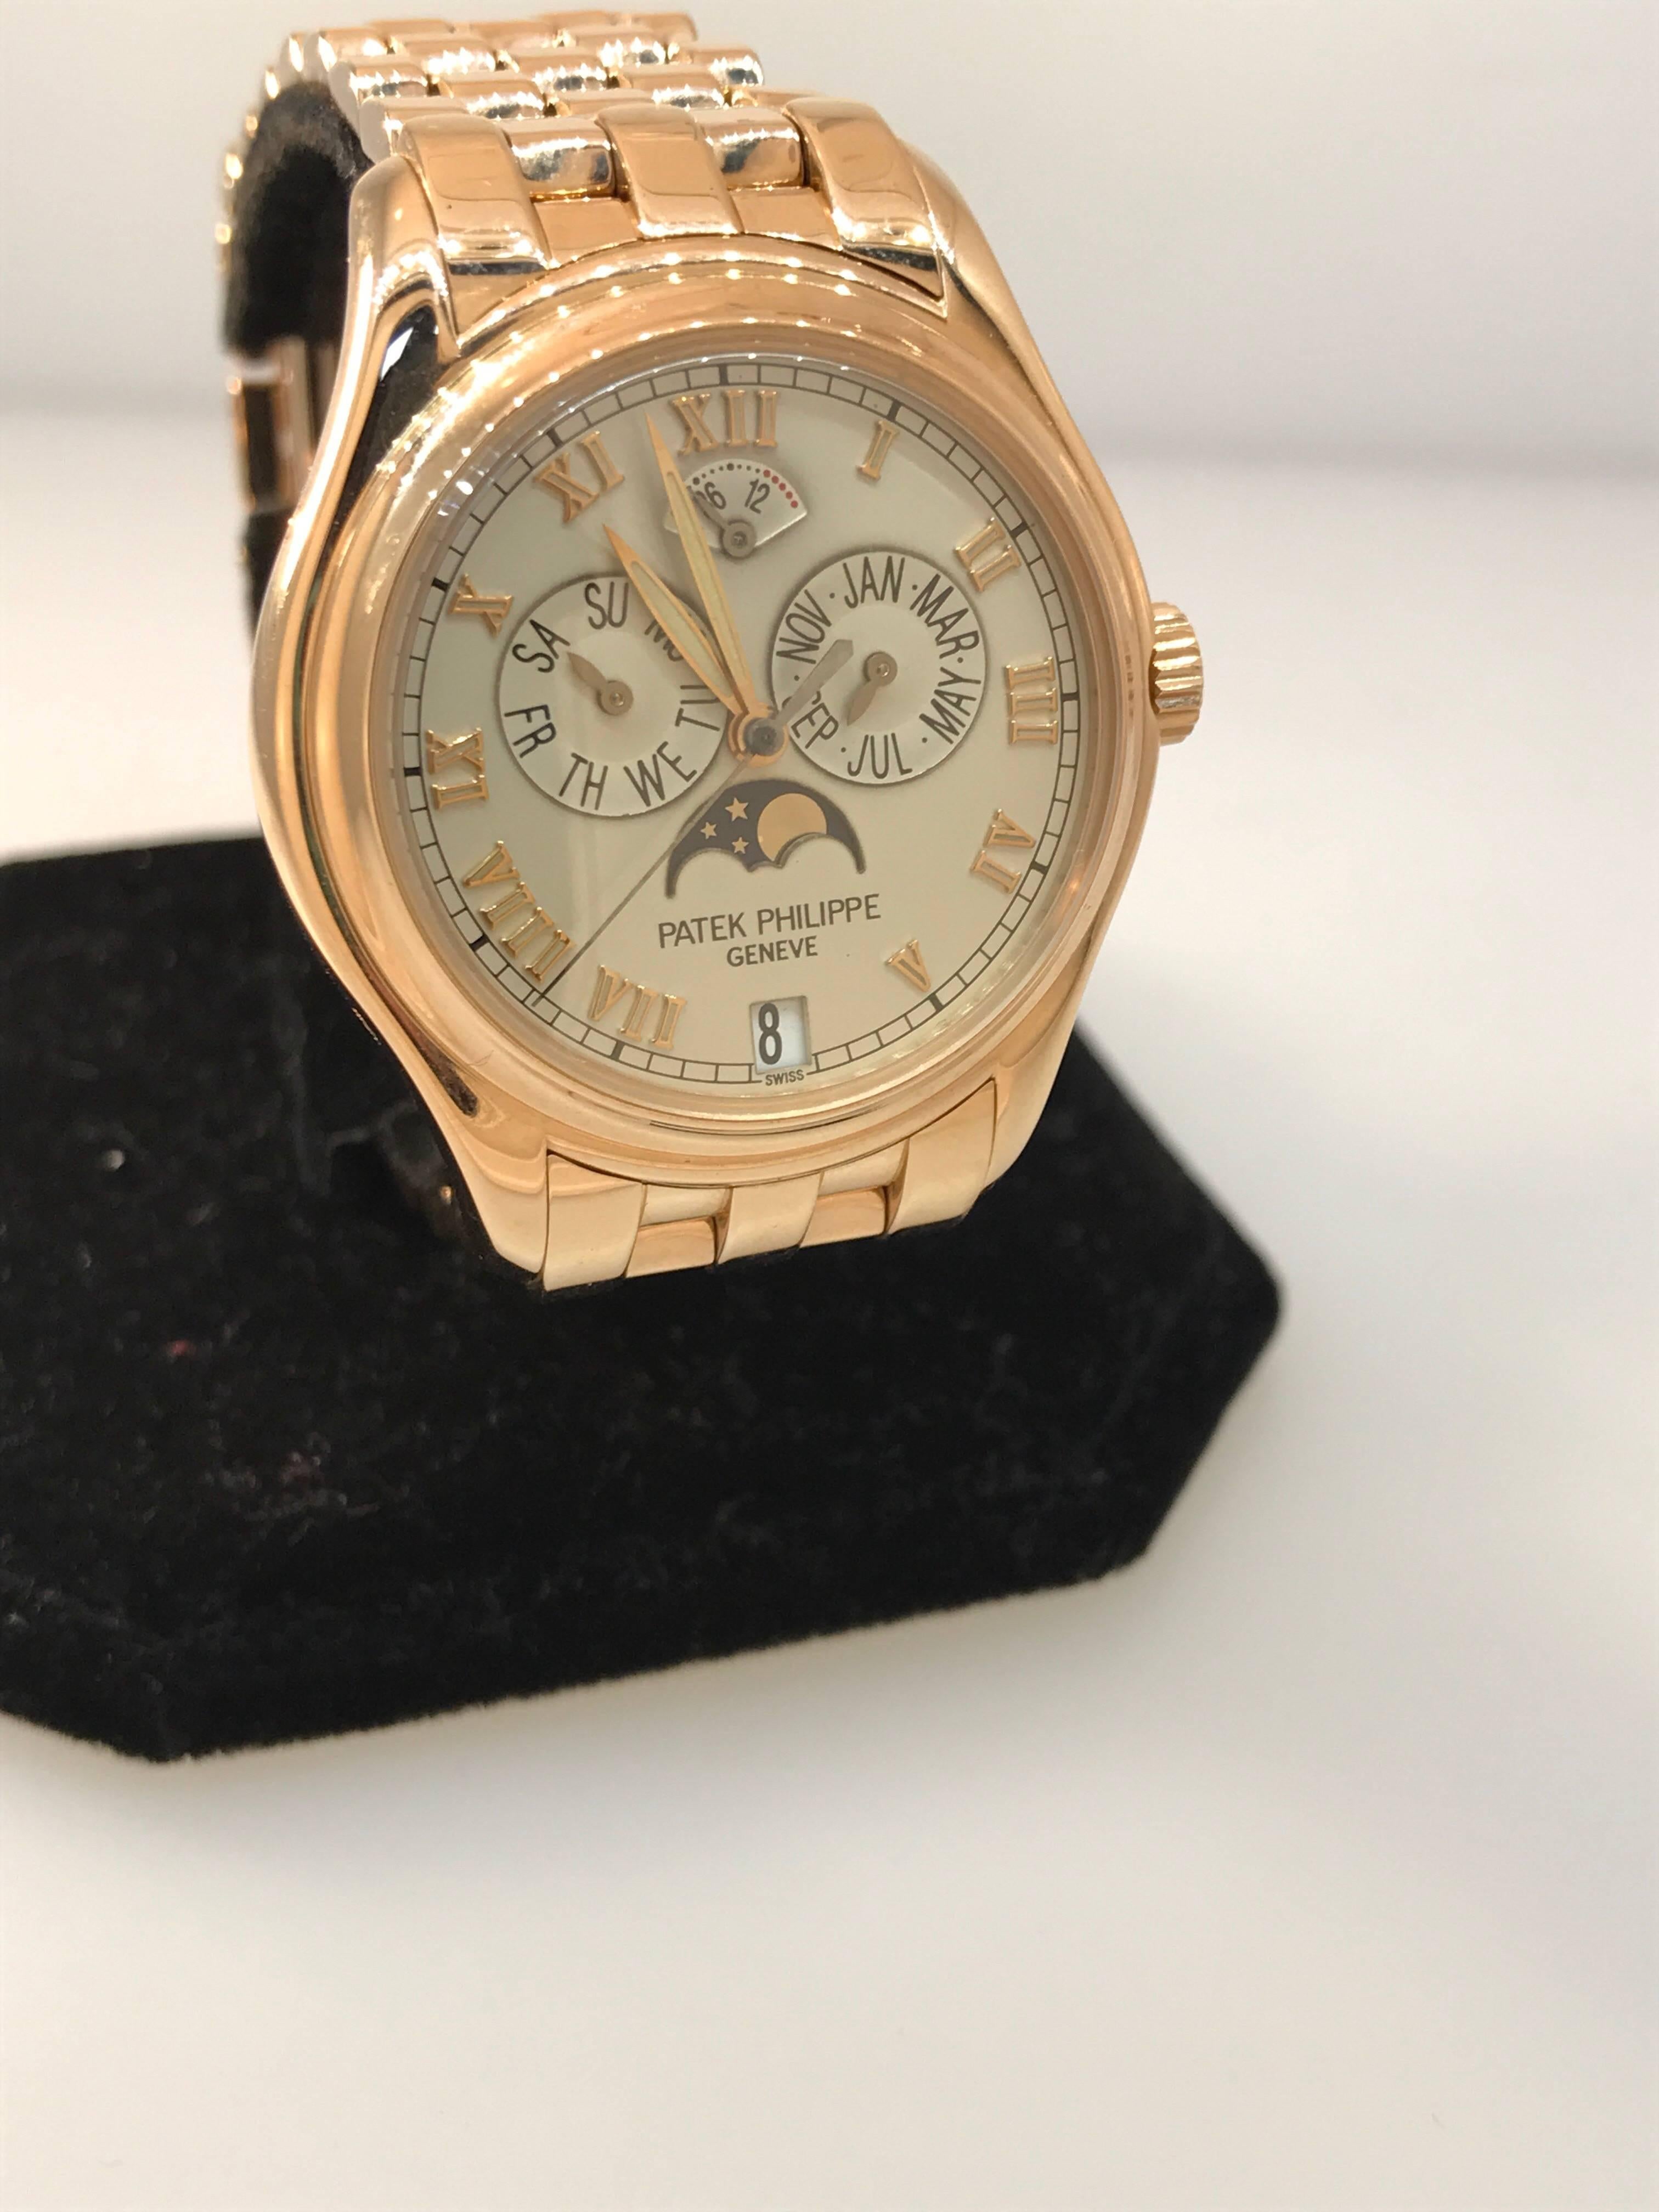 Patek Phillippe Annual Calendar Moonphase Men's watch

Model number 5036/1R

100% Authentic

PRE-OWNED 

Comes with Patek Phillipe box, leather pouch and manual (warranty is missing)

18 karat rose gold case and bracelet

Scratch resistant sapphire